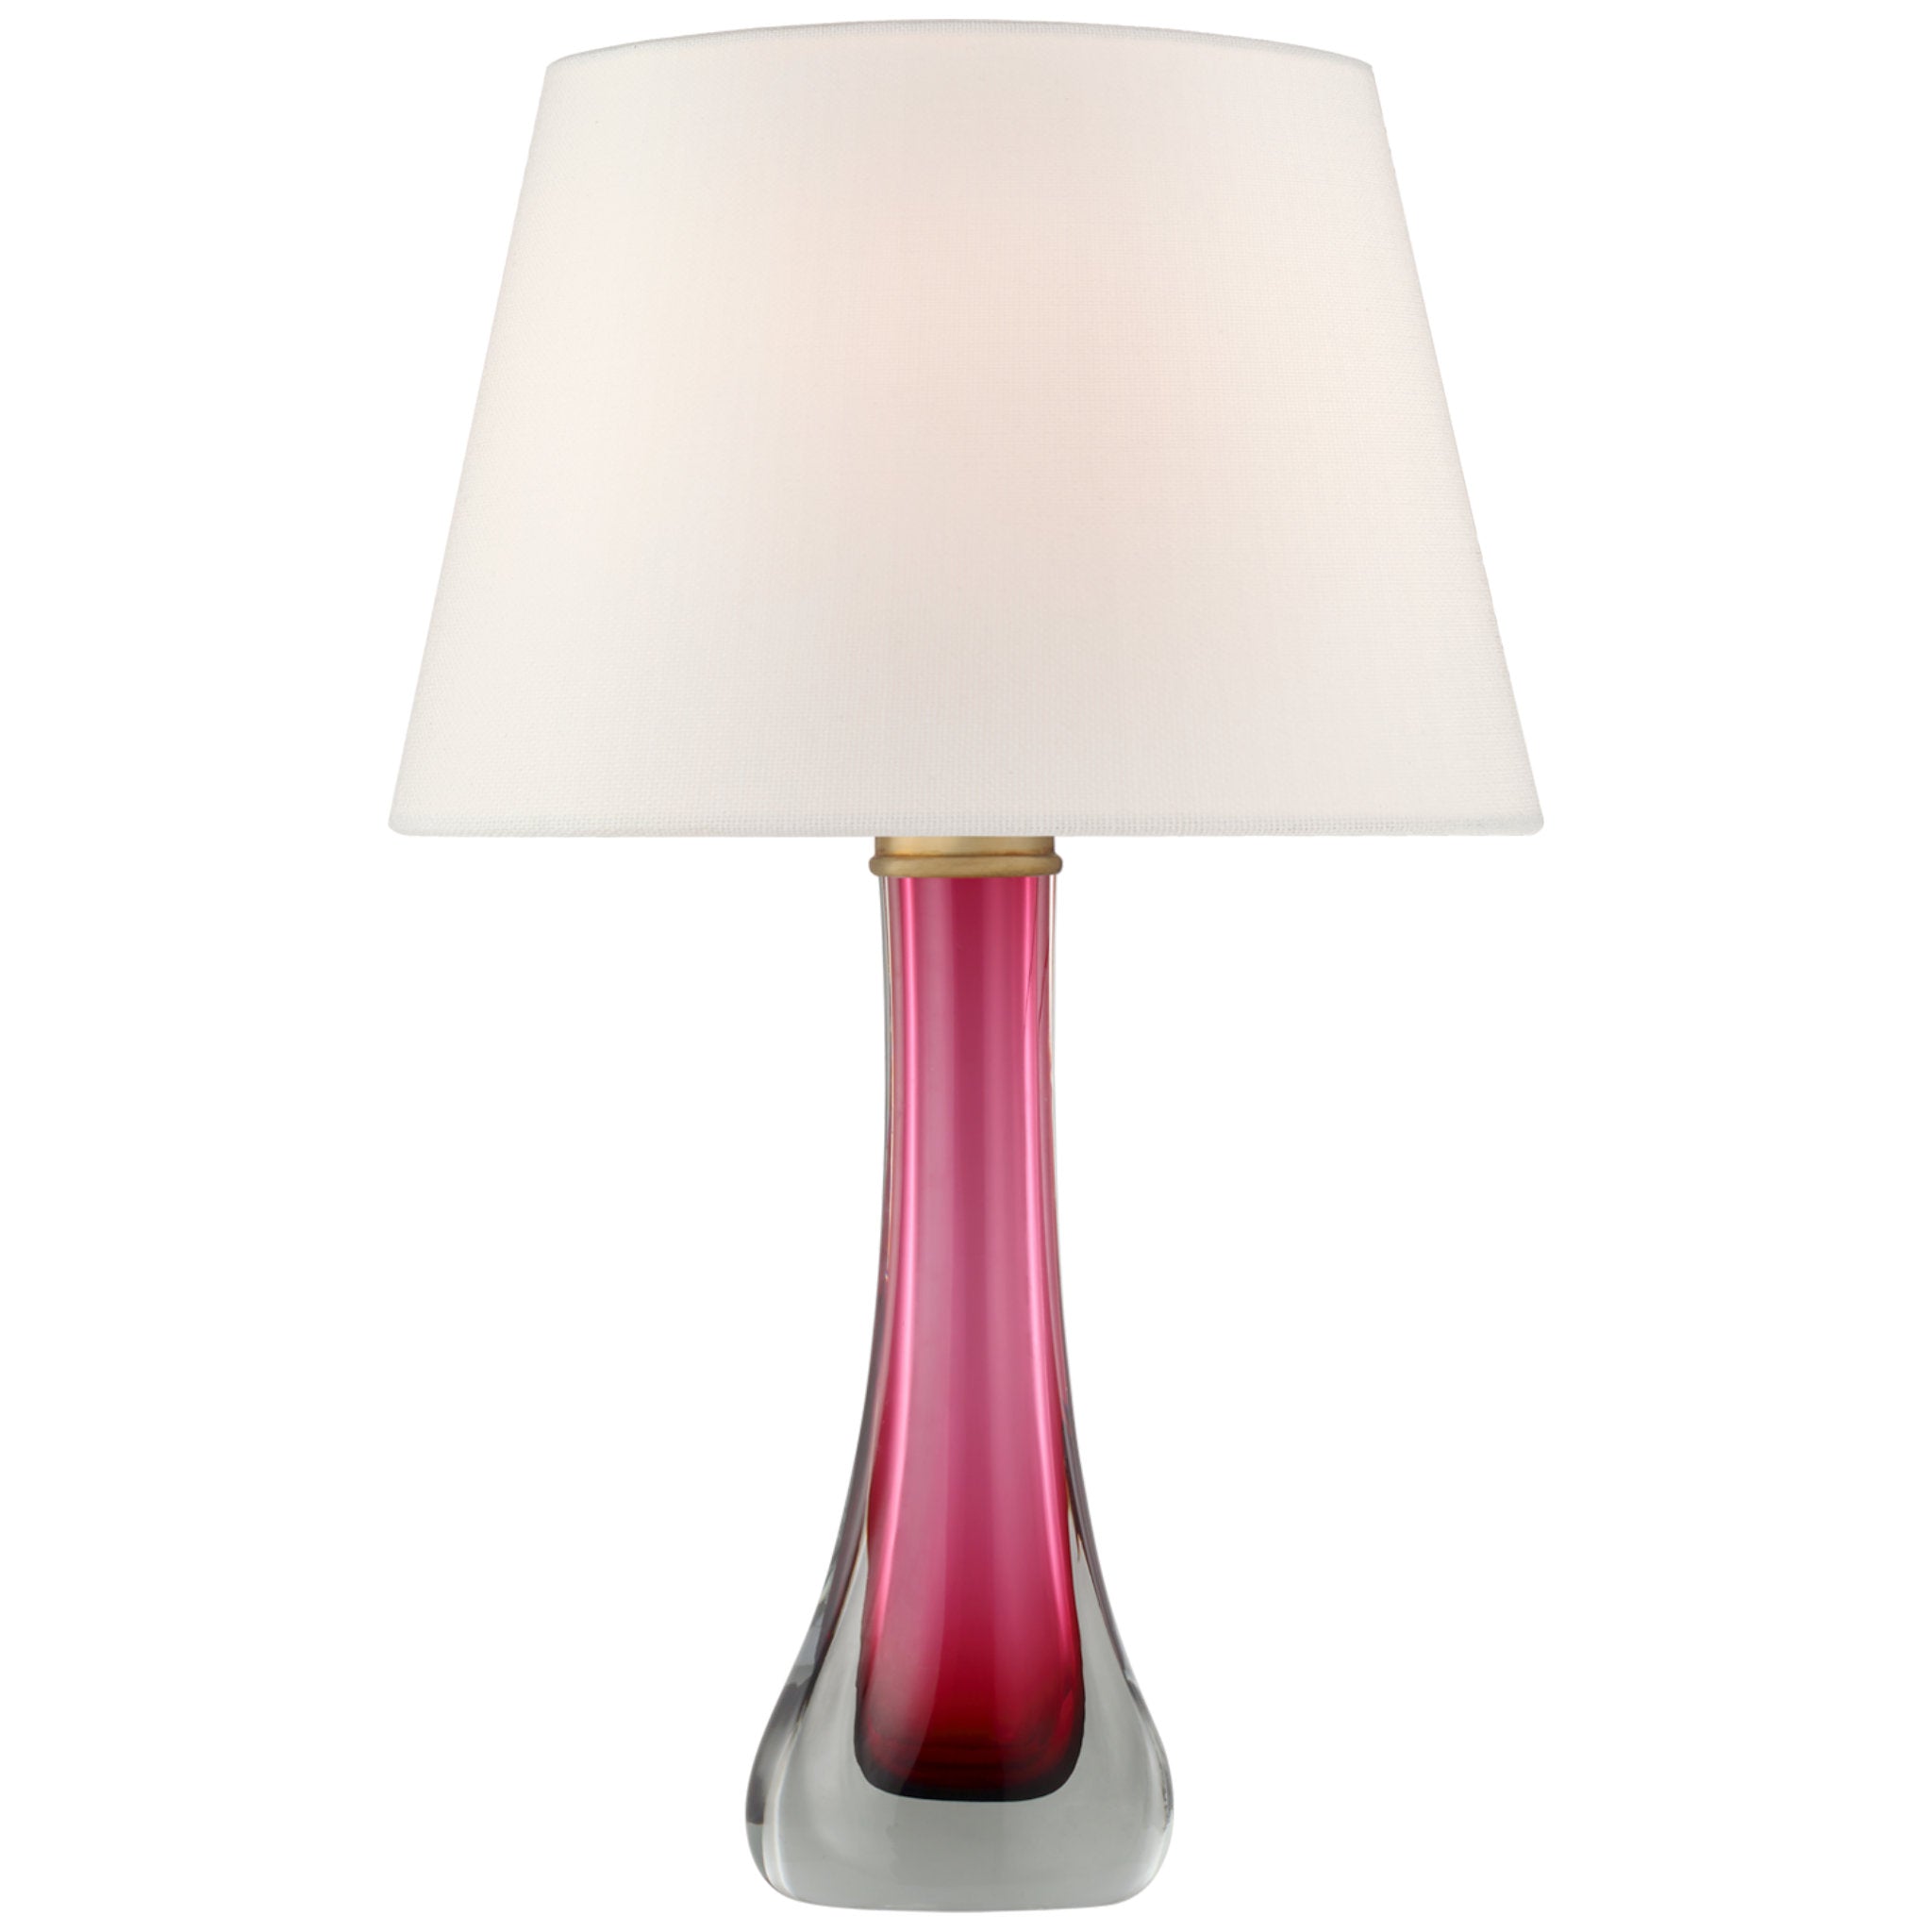 Julie Neill Christa Large Table Lamp in Cerise with Linen Shade